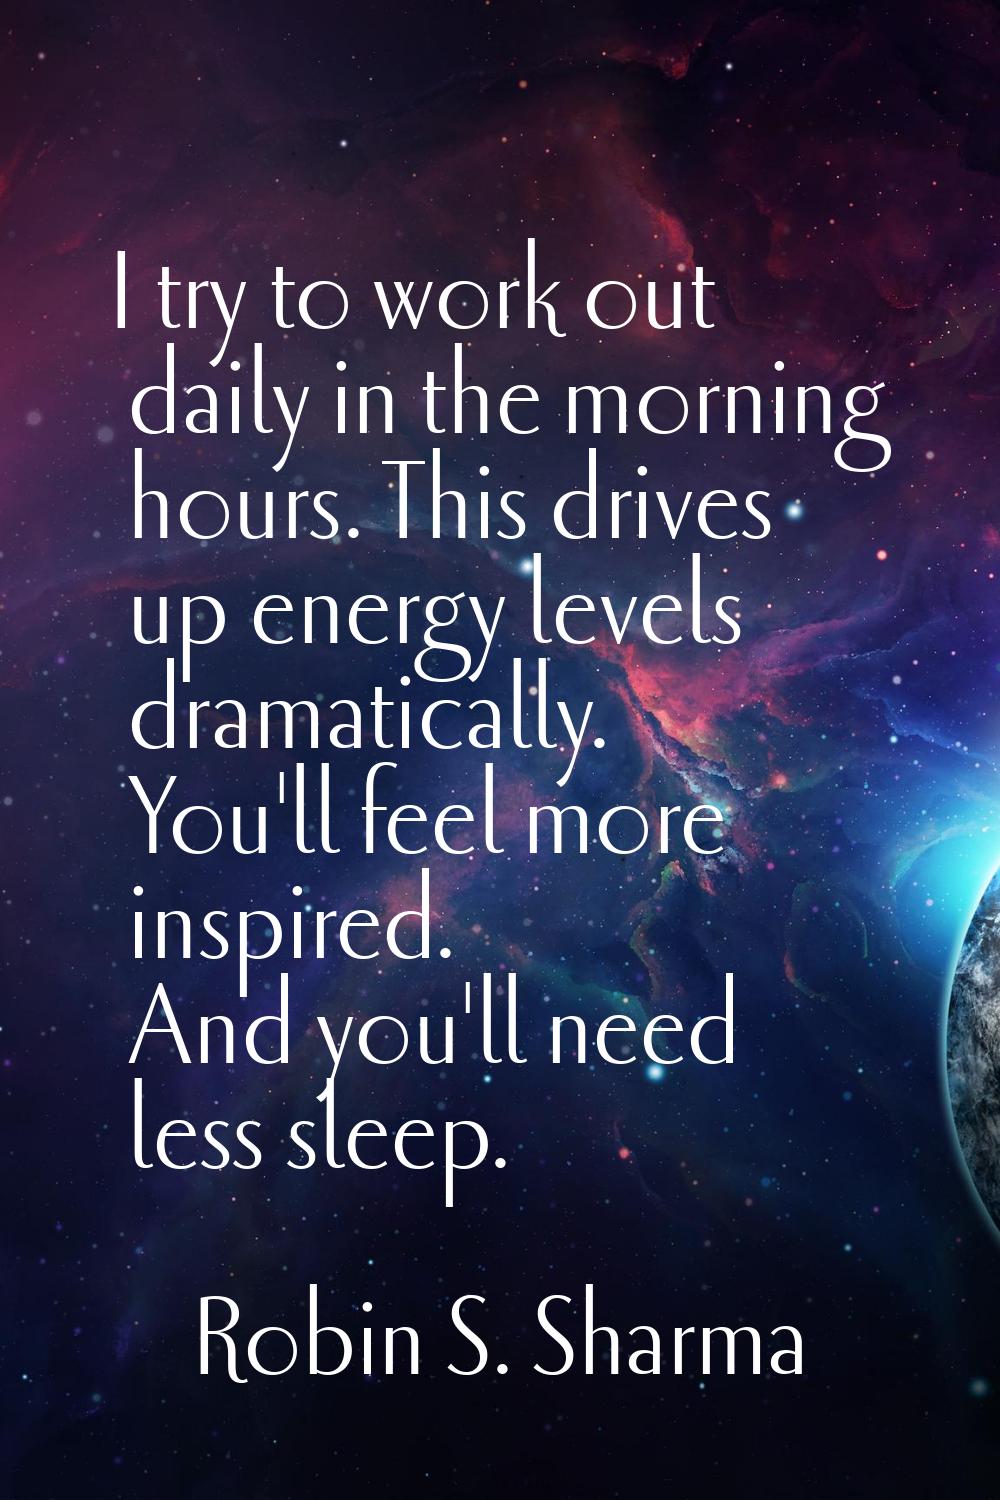 I try to work out daily in the morning hours. This drives up energy levels dramatically. You'll fee